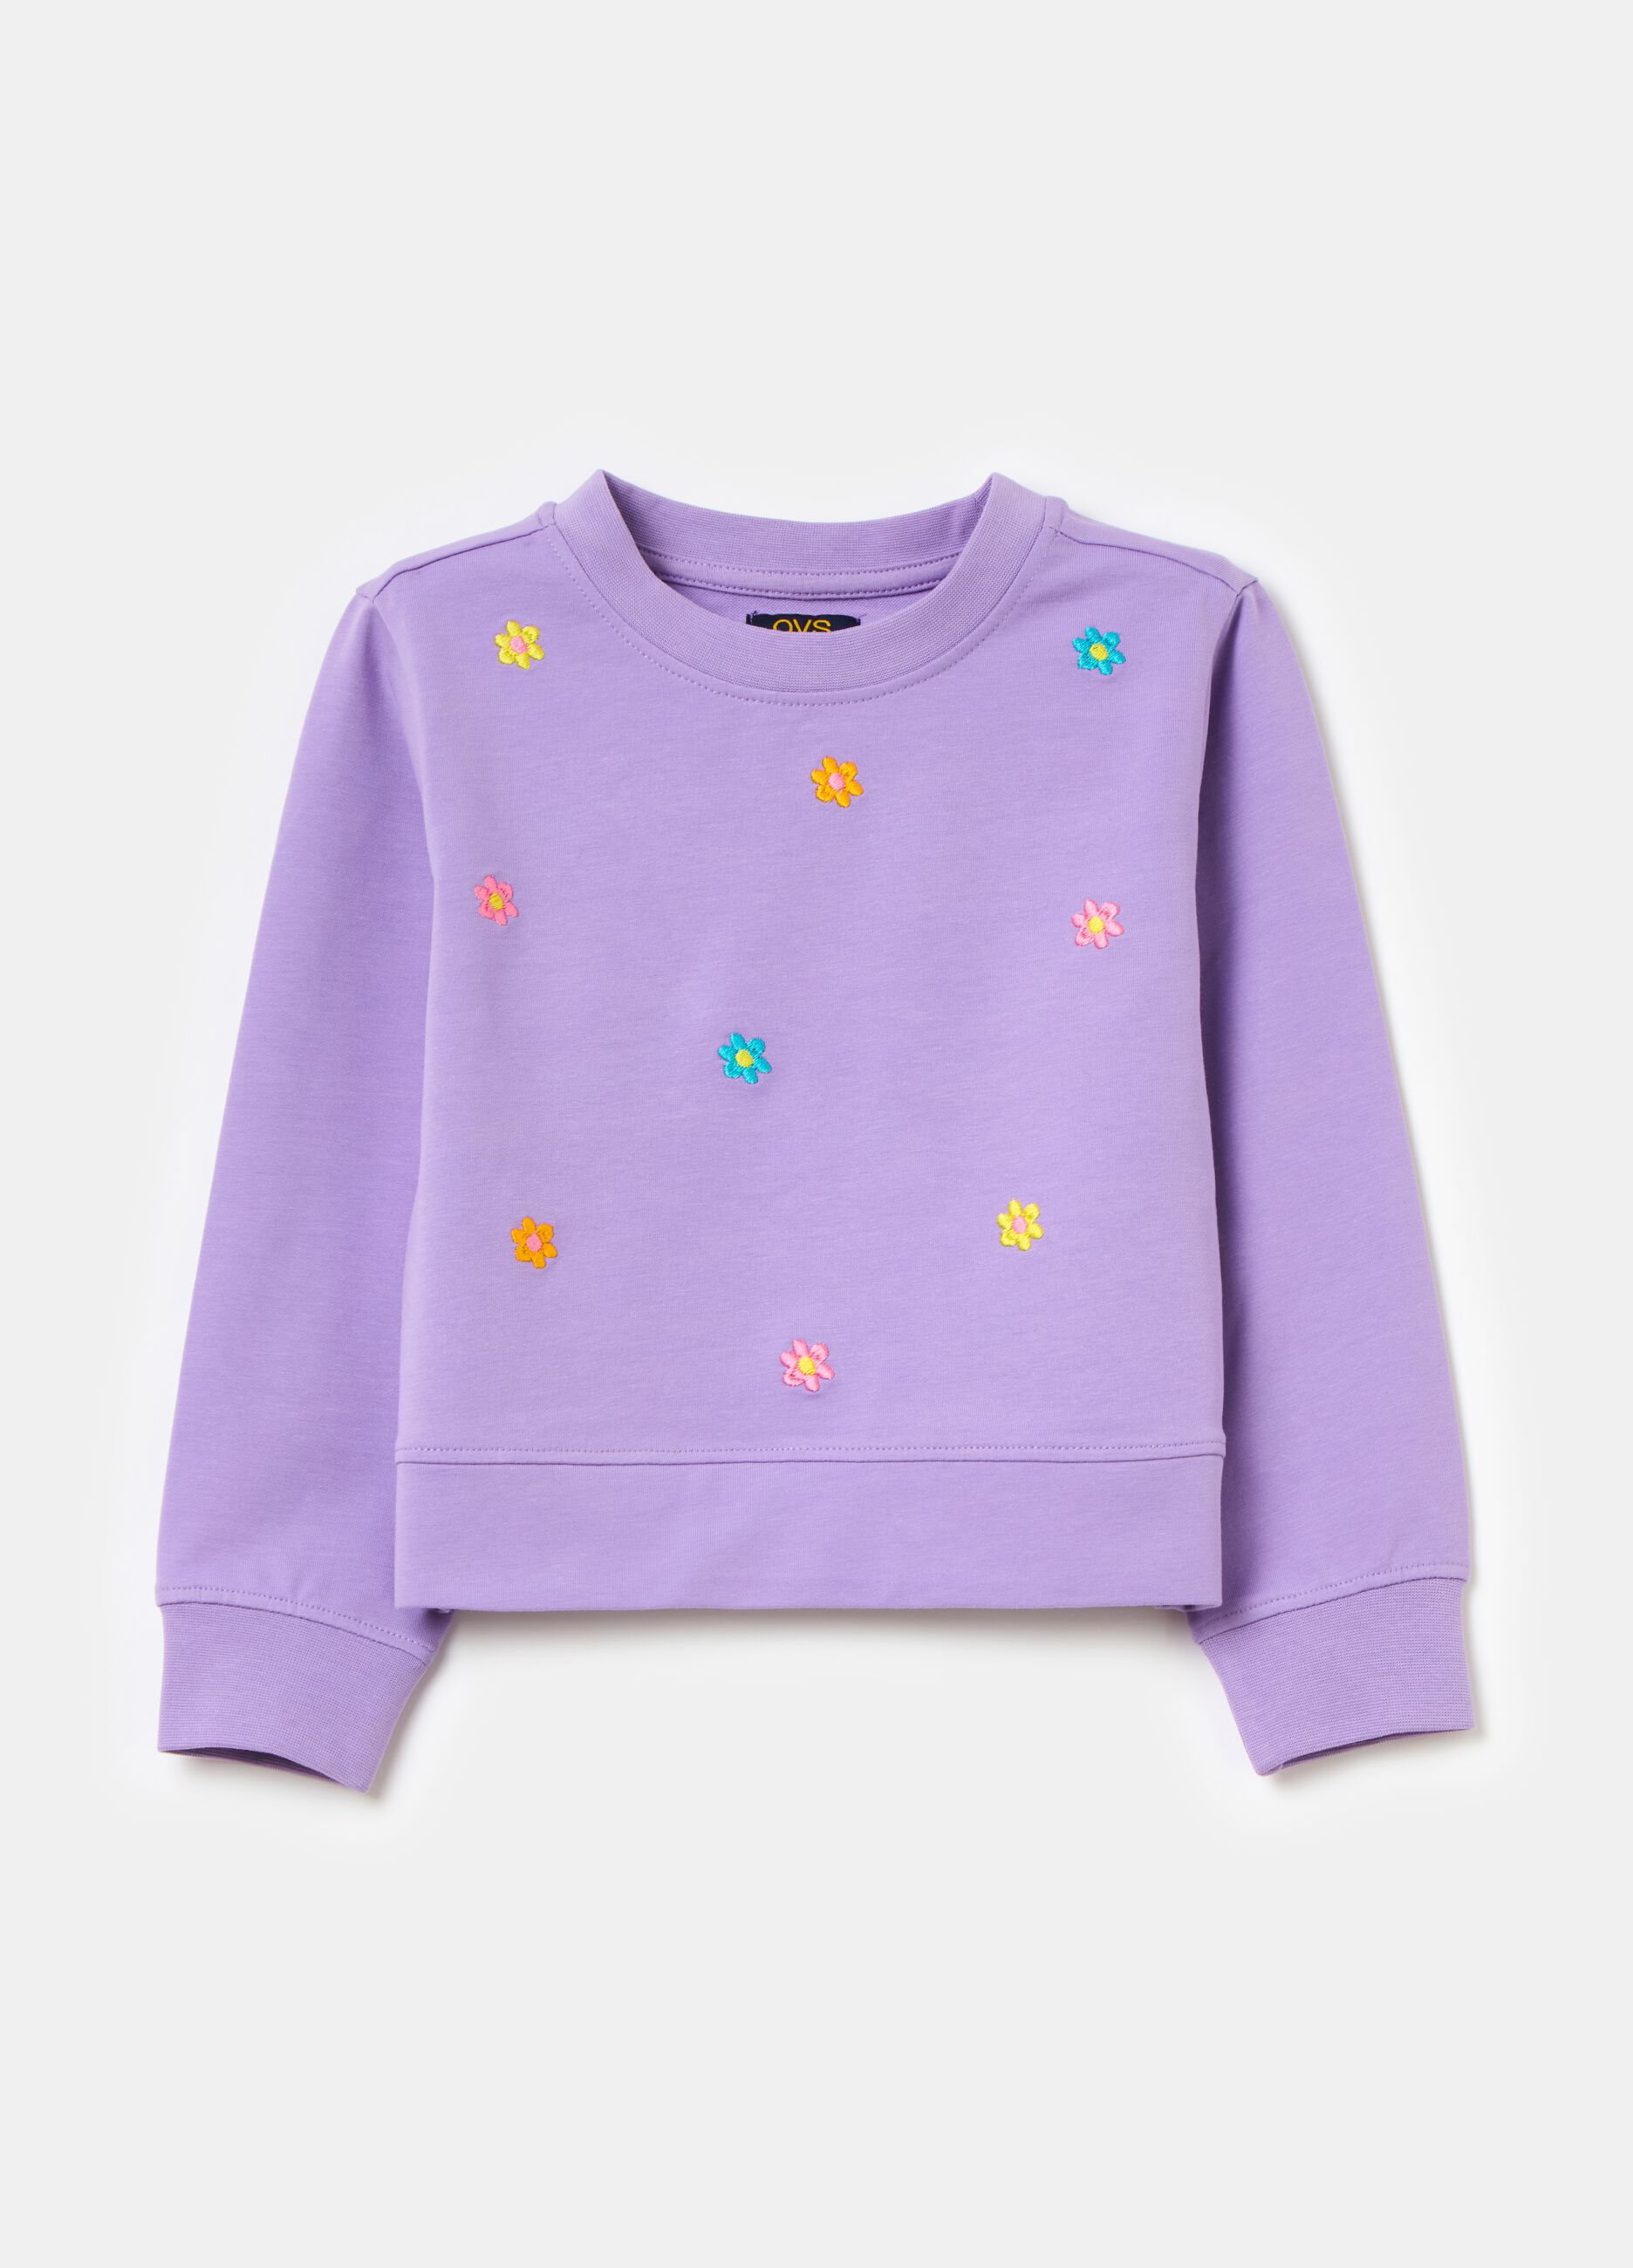 Sweatshirt with small flowers embroidery